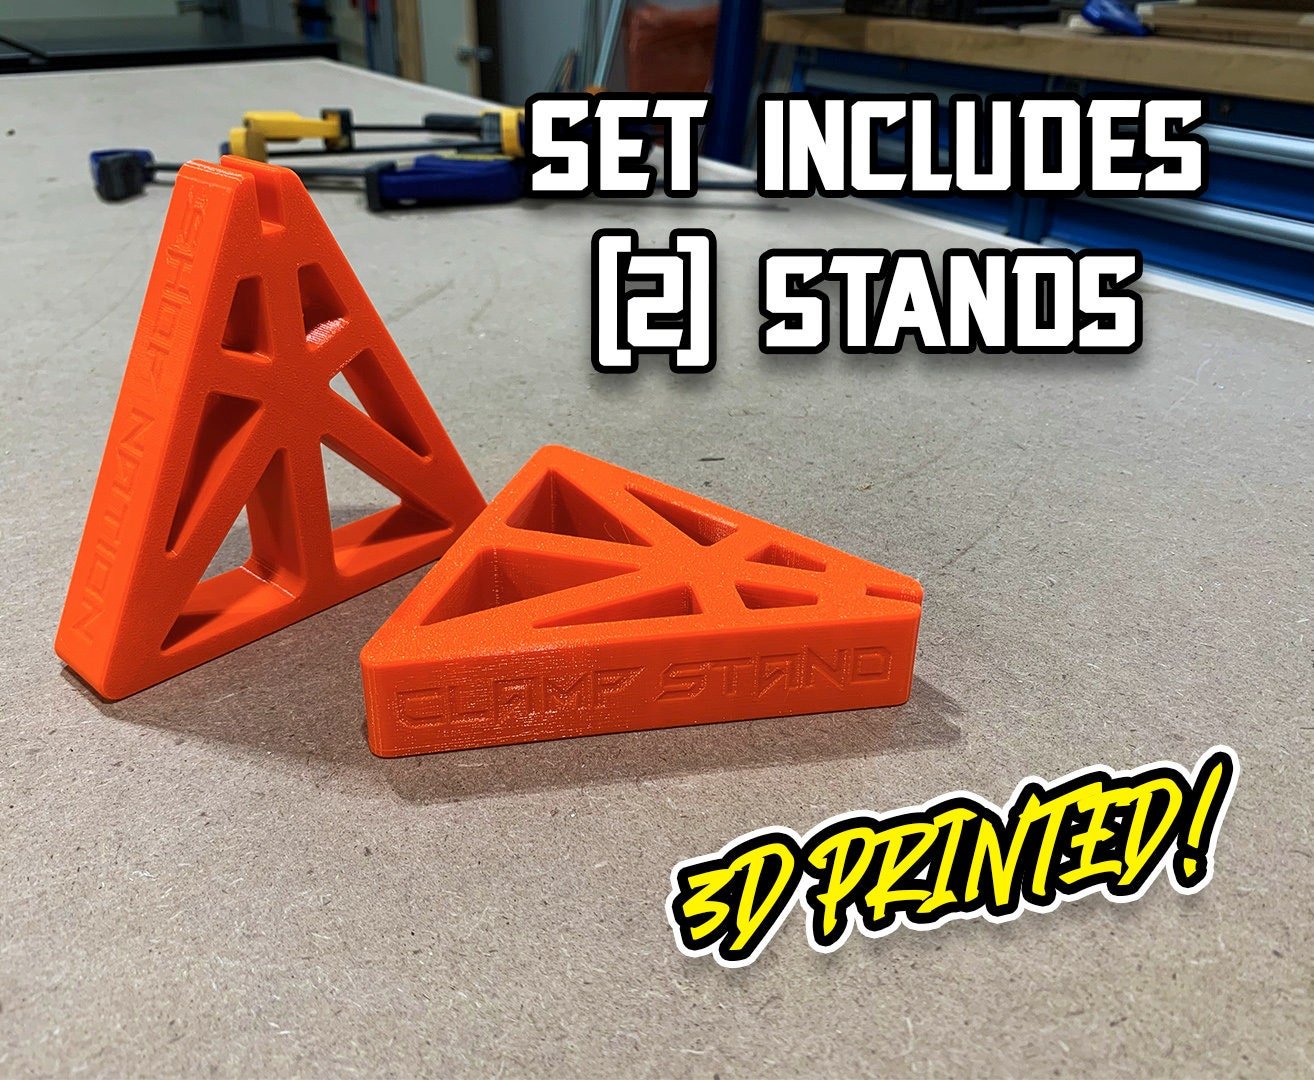 F-Style Clamp Stands - Woodworking Tools - Shop Nation Store